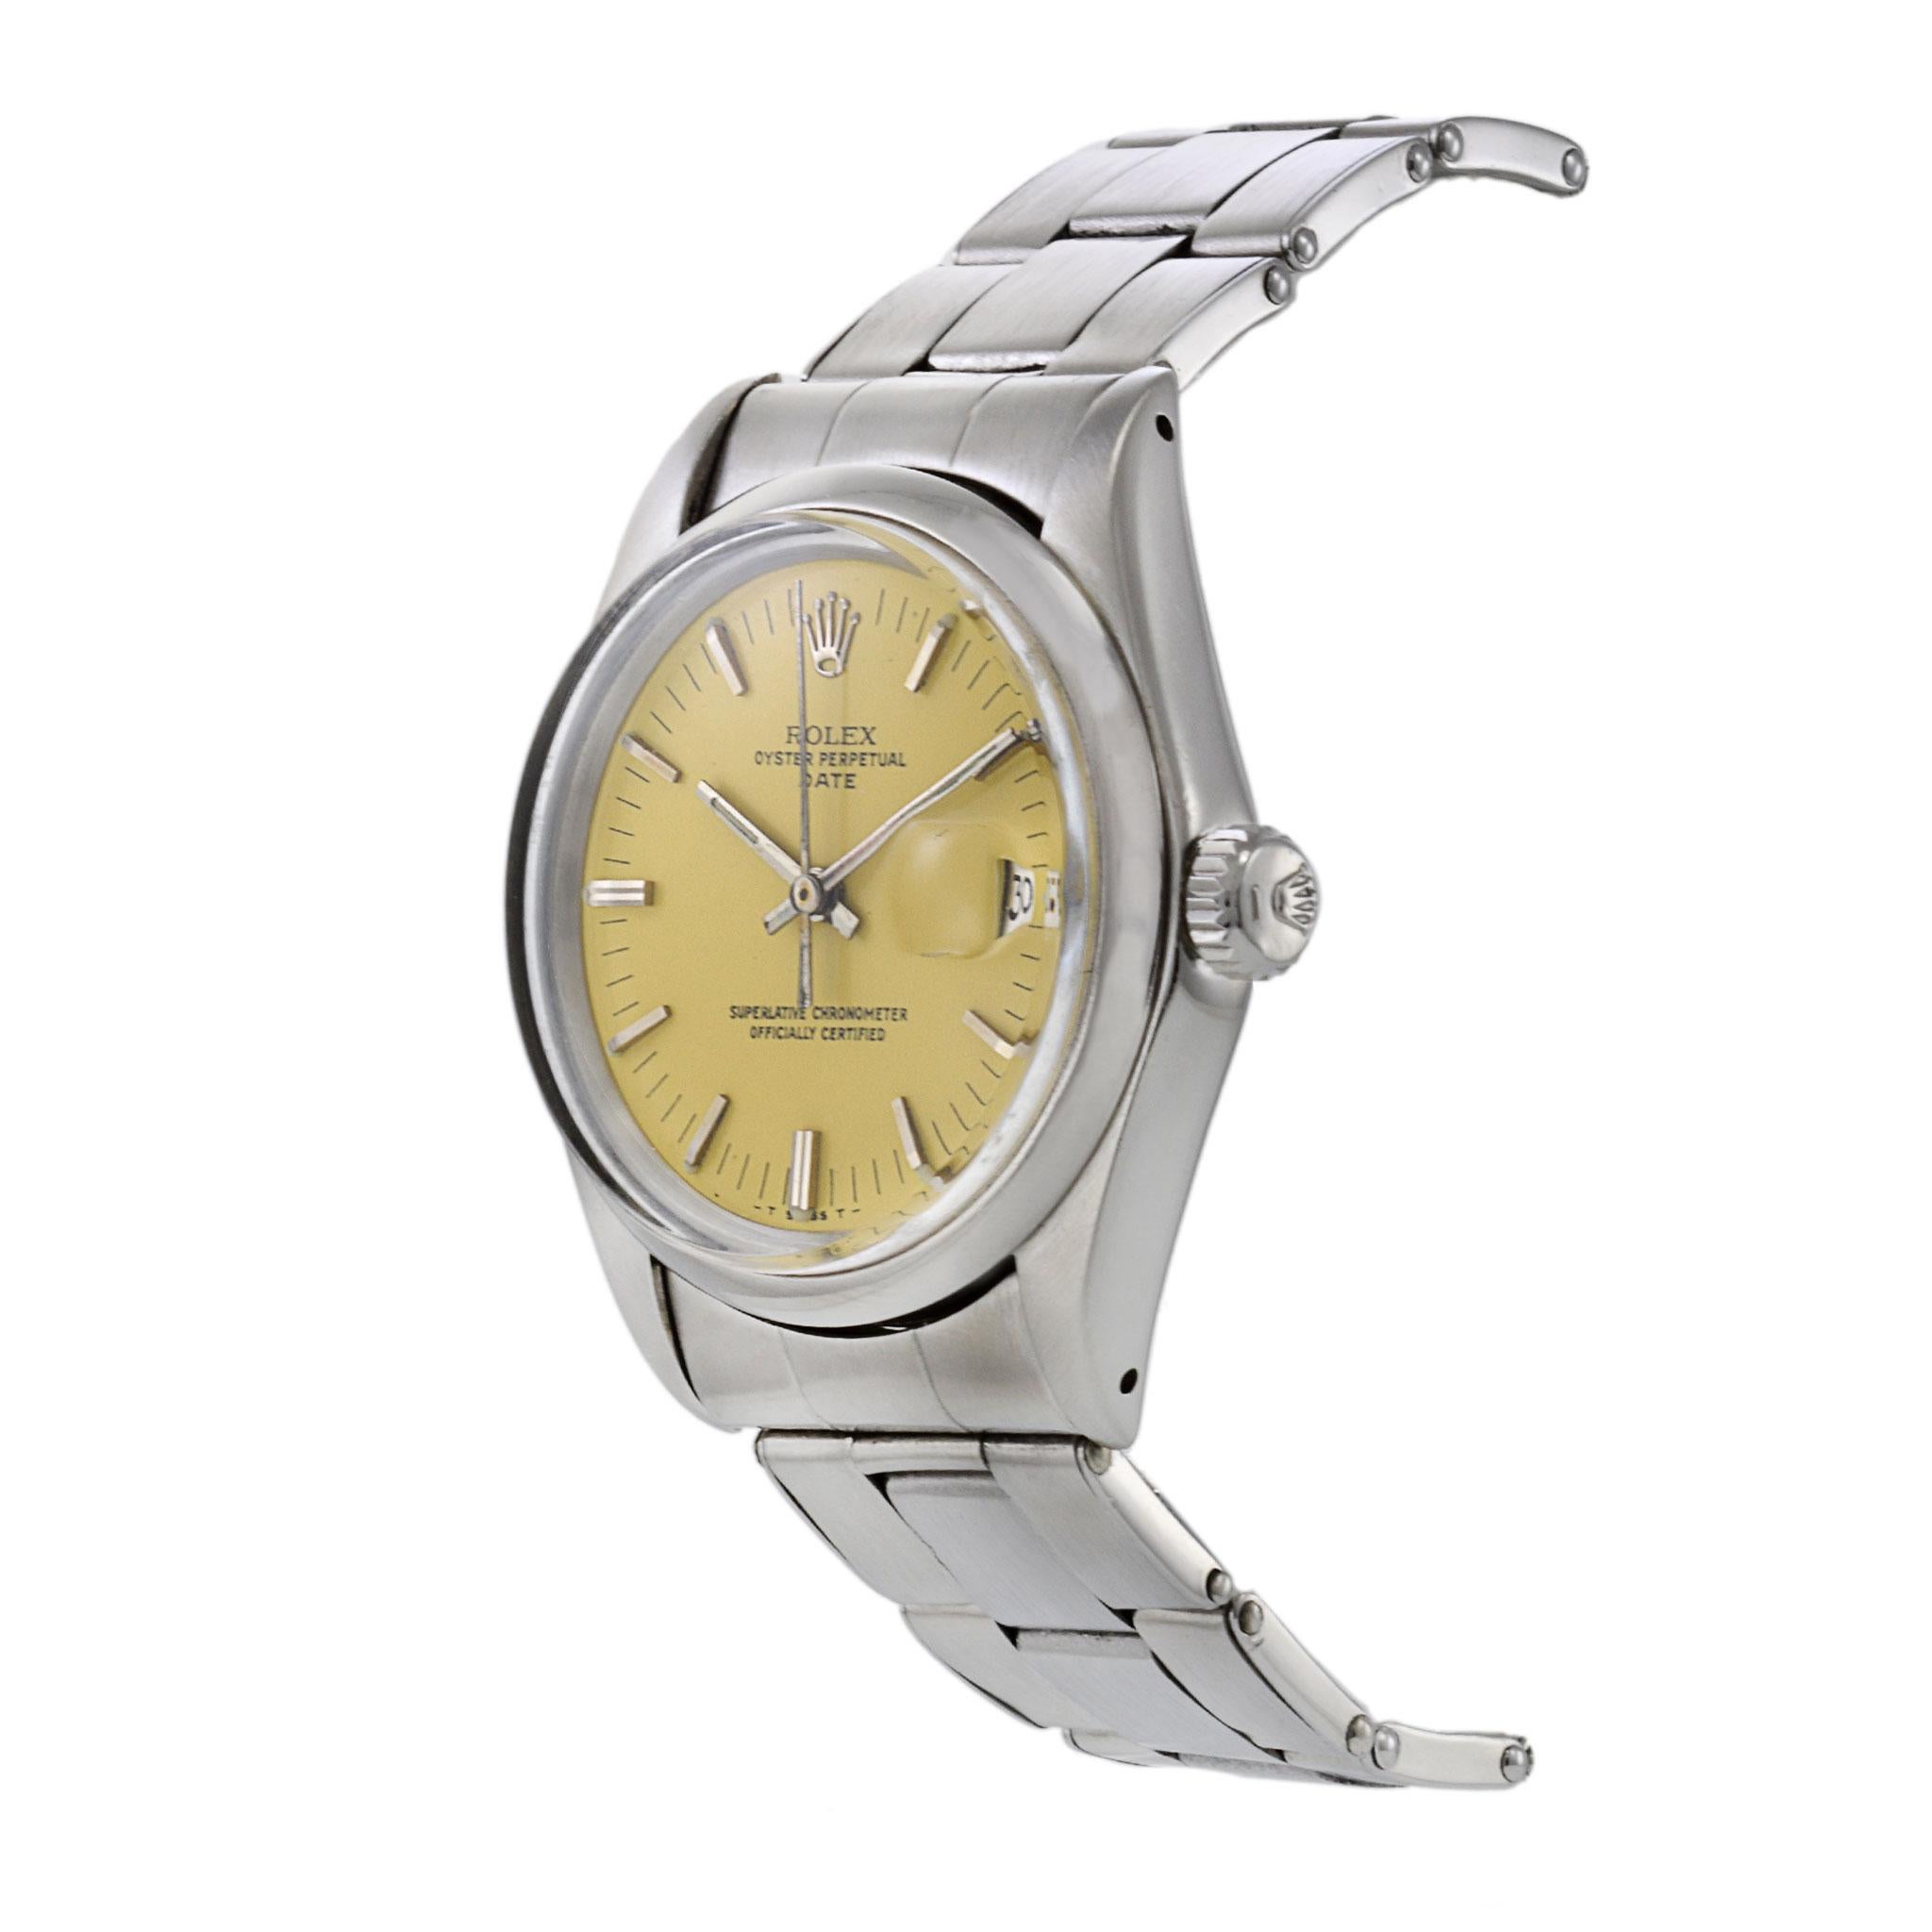 Rolex Oyster Perpetual Date Referenz 1500 im Zustand „Gut“ im Angebot in New York, NY